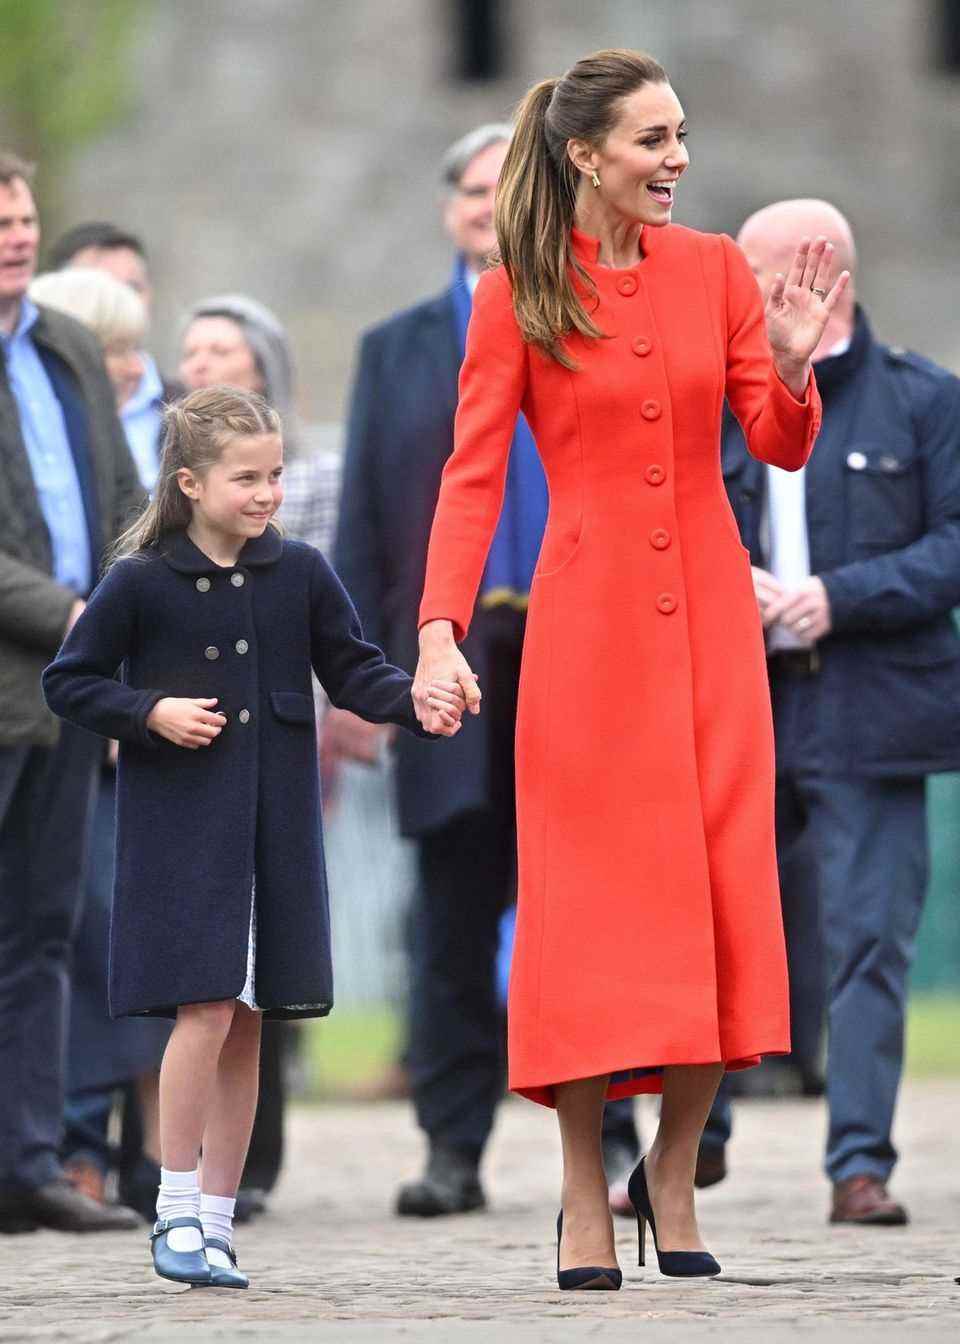 Celebrations of Queen Elizabeth's 70th jubilee will begin next week.  Of course, Duchess Catherine should not be missing.  At the concert in Wales she appears in a red and orange coat dress.  Unlike the days before, she wears her hair in a voluminous ponytail.  Her black pumps form a modern contrast to the bright dress.  10 points for outfit number 3!